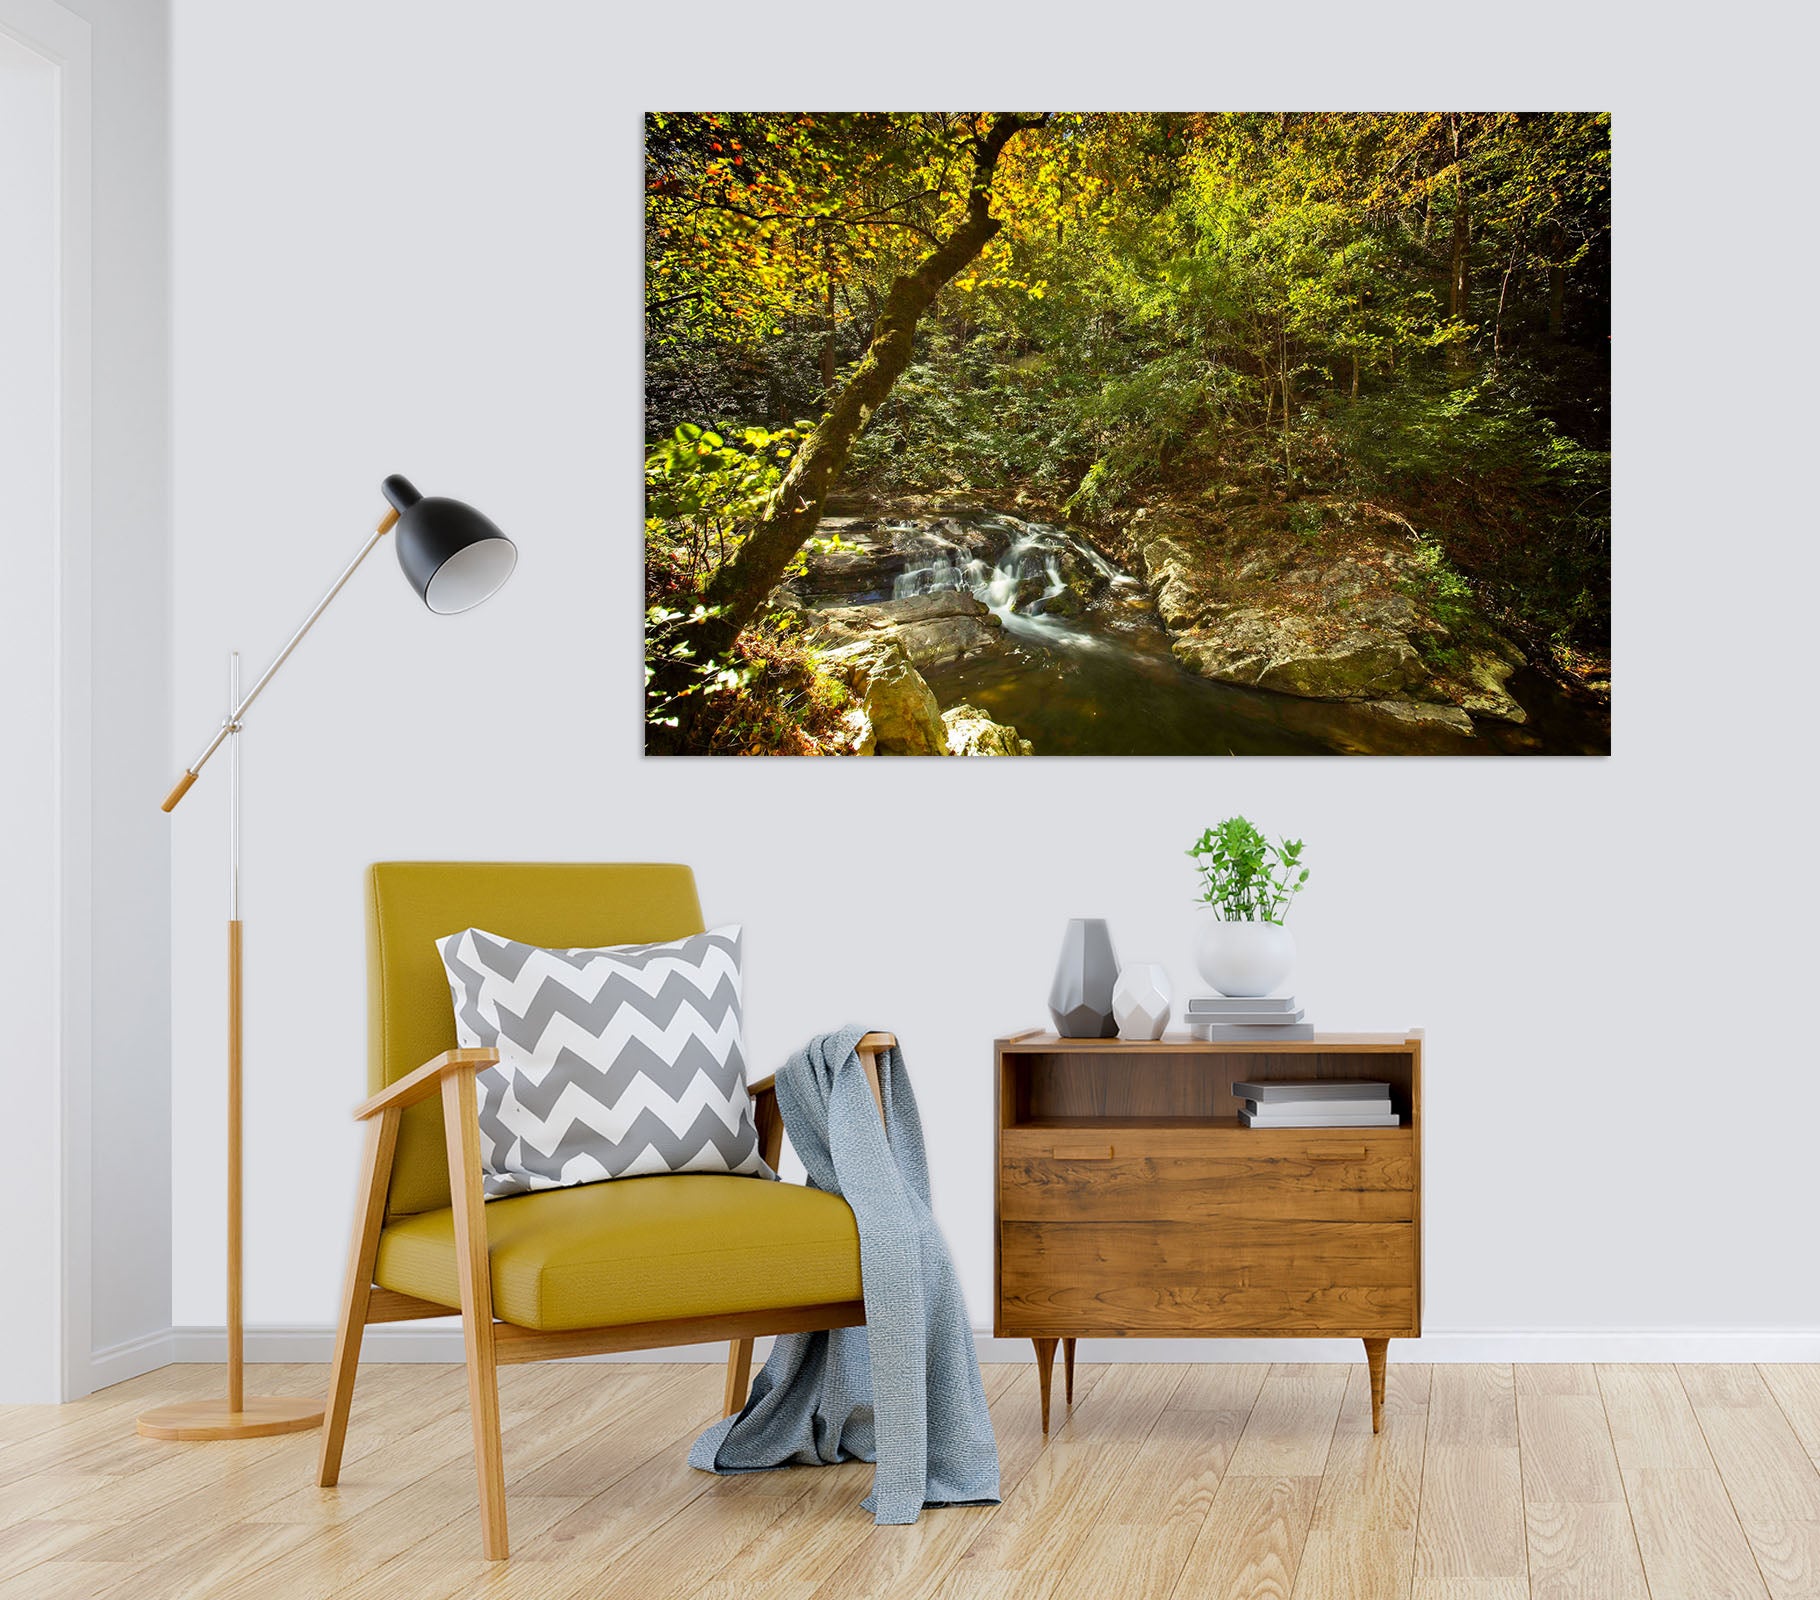 3D Tranquil Valley 032 Kathy Barefield Wall Sticker